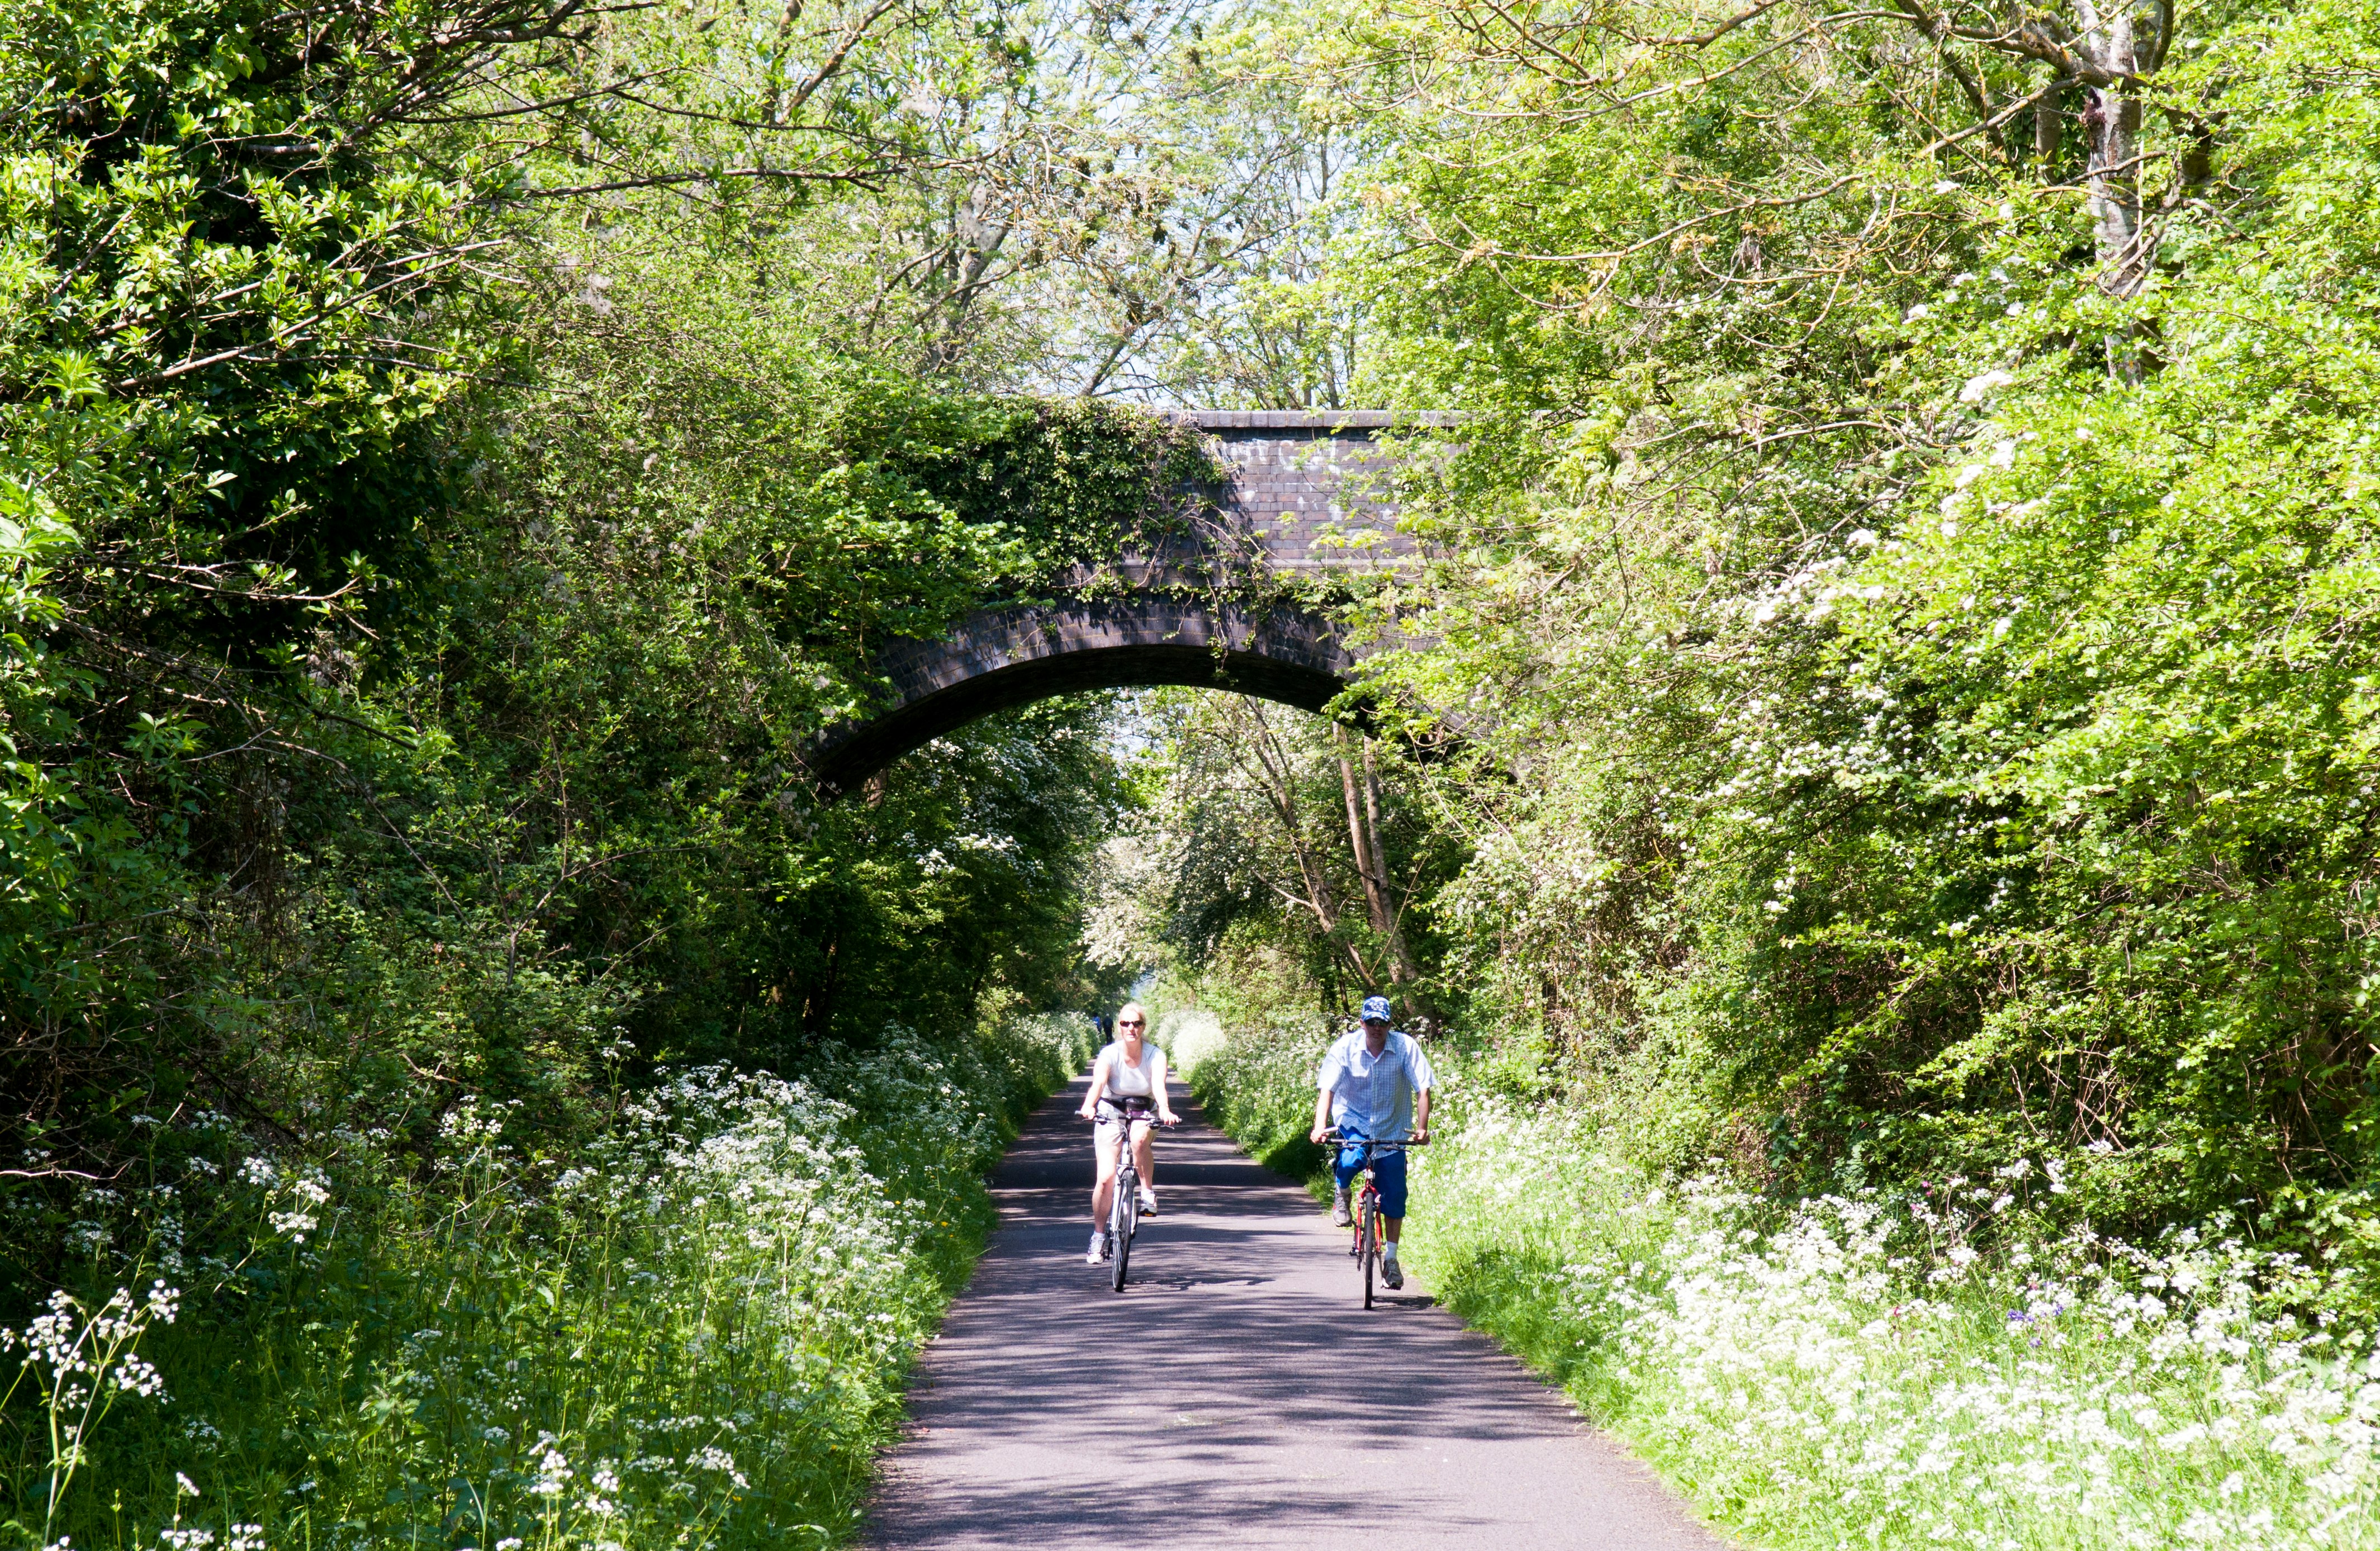 Two cyclists on the Bristol and Bath Railway Path, among wildflowers and a stone arch bridge